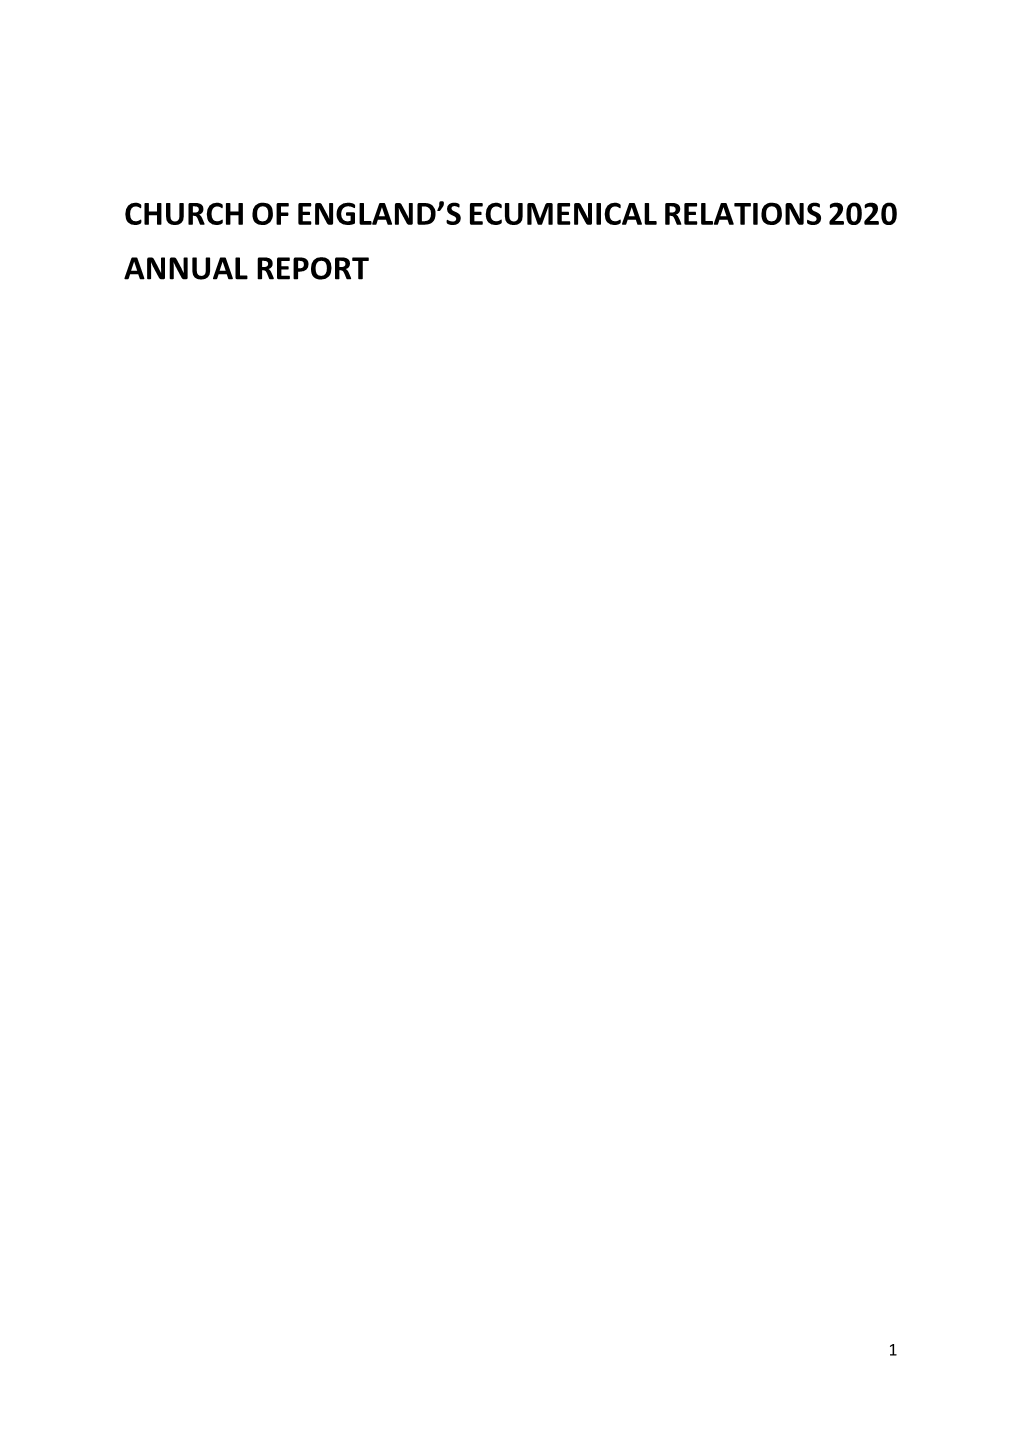 Church of England's Ecumenical Relations 2020 Annual Report